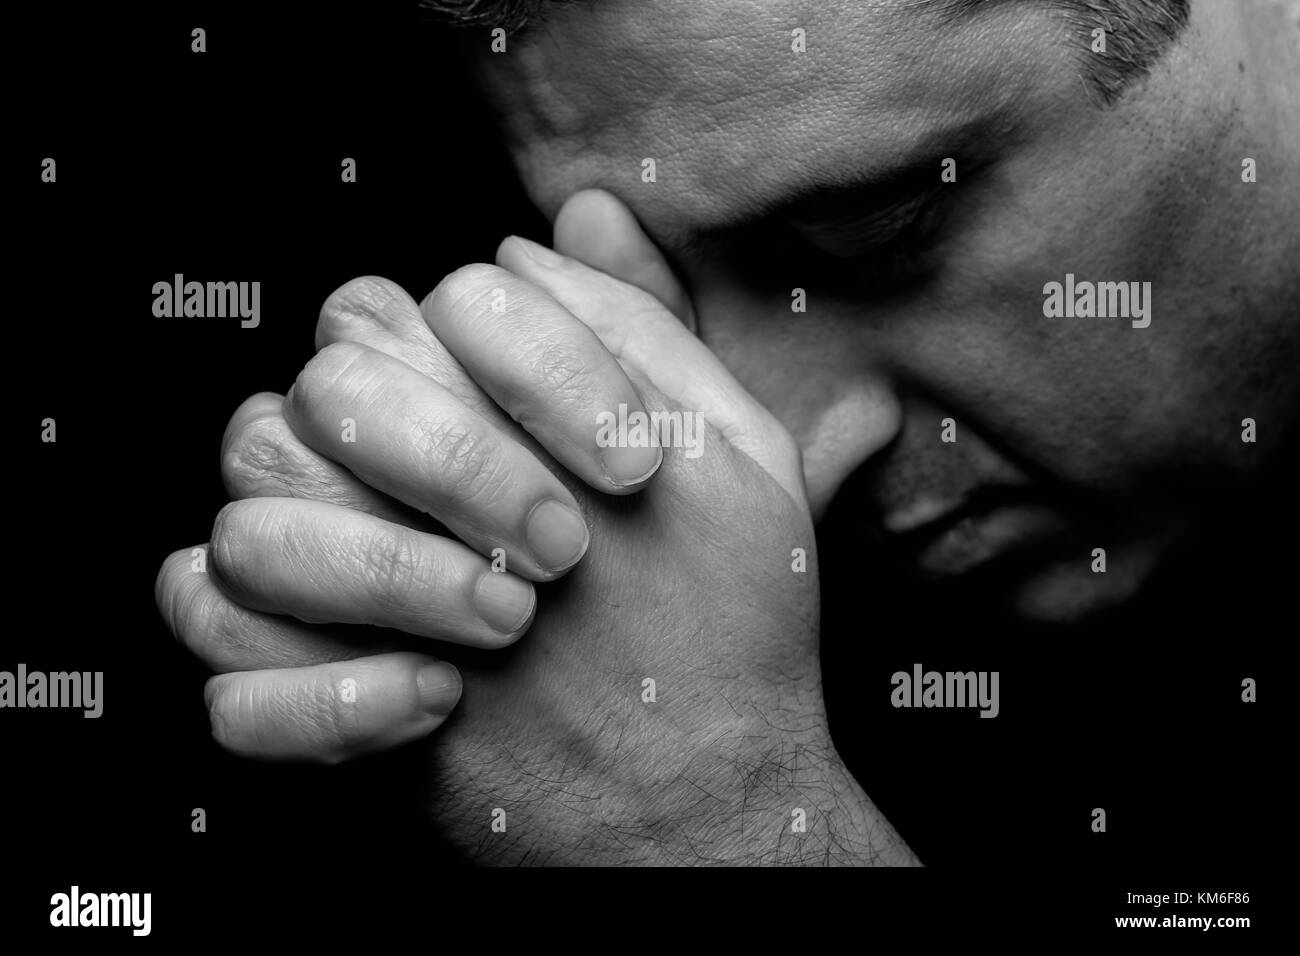 Close up of faithful mature man praying hands folded worship god head down and eyes closed in religious black background religion portrait Christian Stock Photo